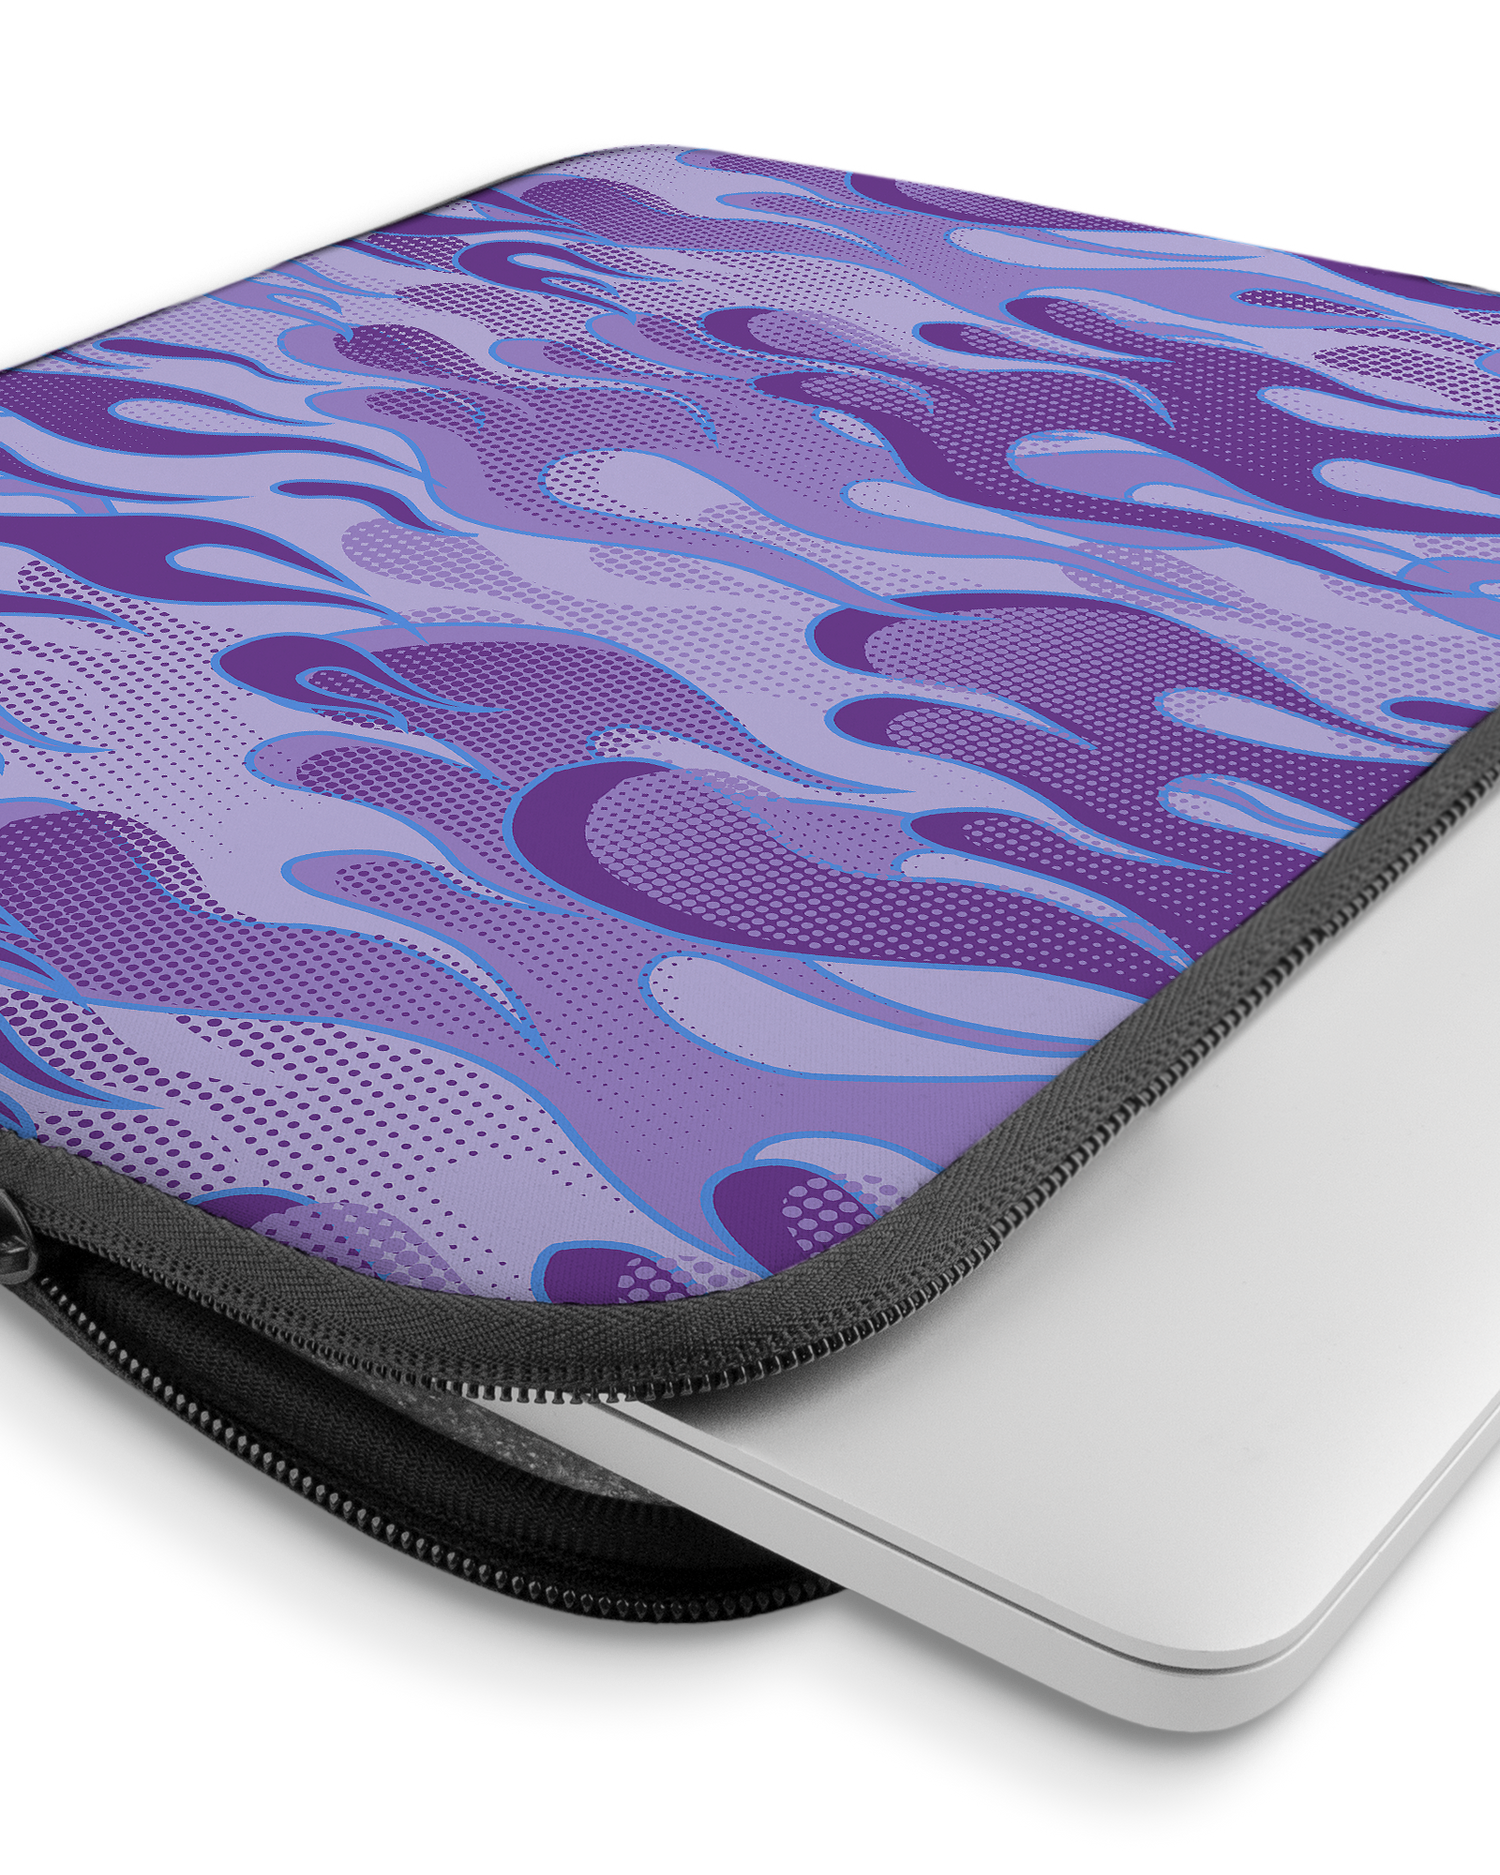 Purple Flames Laptop Case 15 inch with device inside